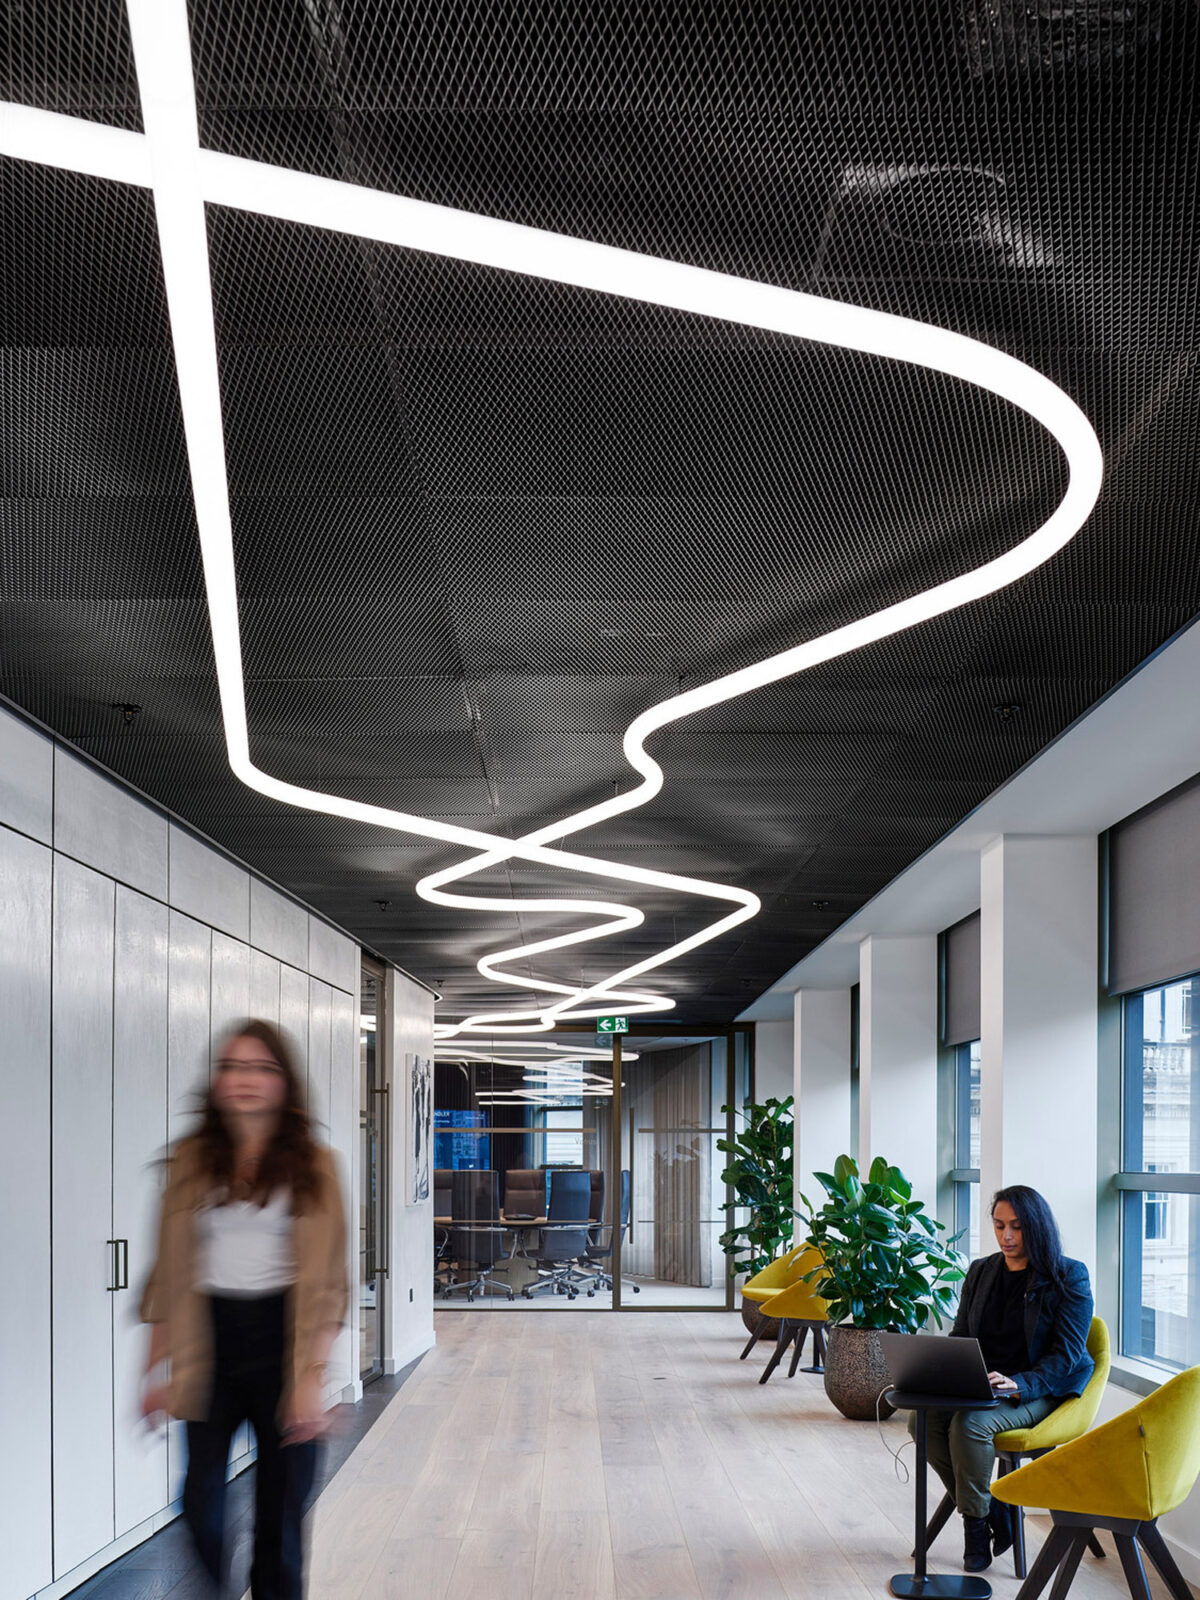 Modern office lobby with dynamic LED lighting gracefully snaking across a black mesh ceiling. The scene includes wood flooring, sleek dark wall panels, and vibrant yellow accent chairs. Individuals are engaging in casual work activities in a contemporary, energized environment.